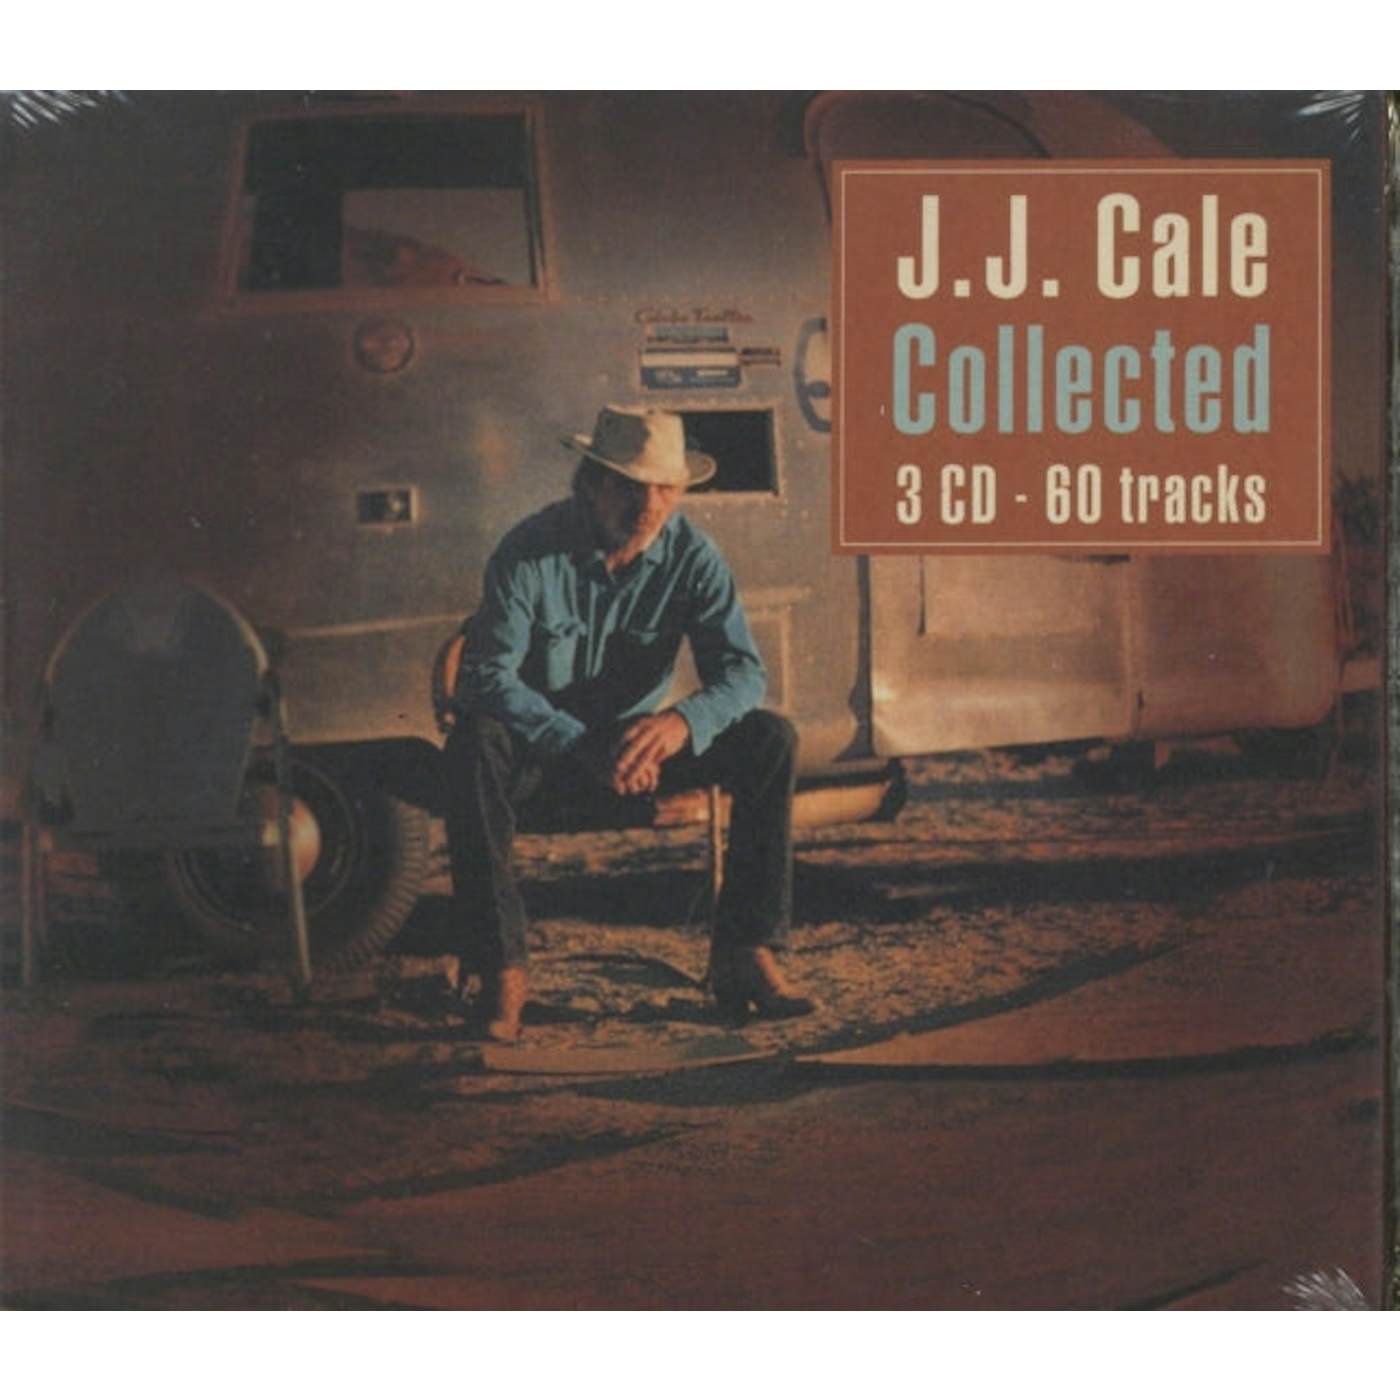 J.J. Cale CD - Collected